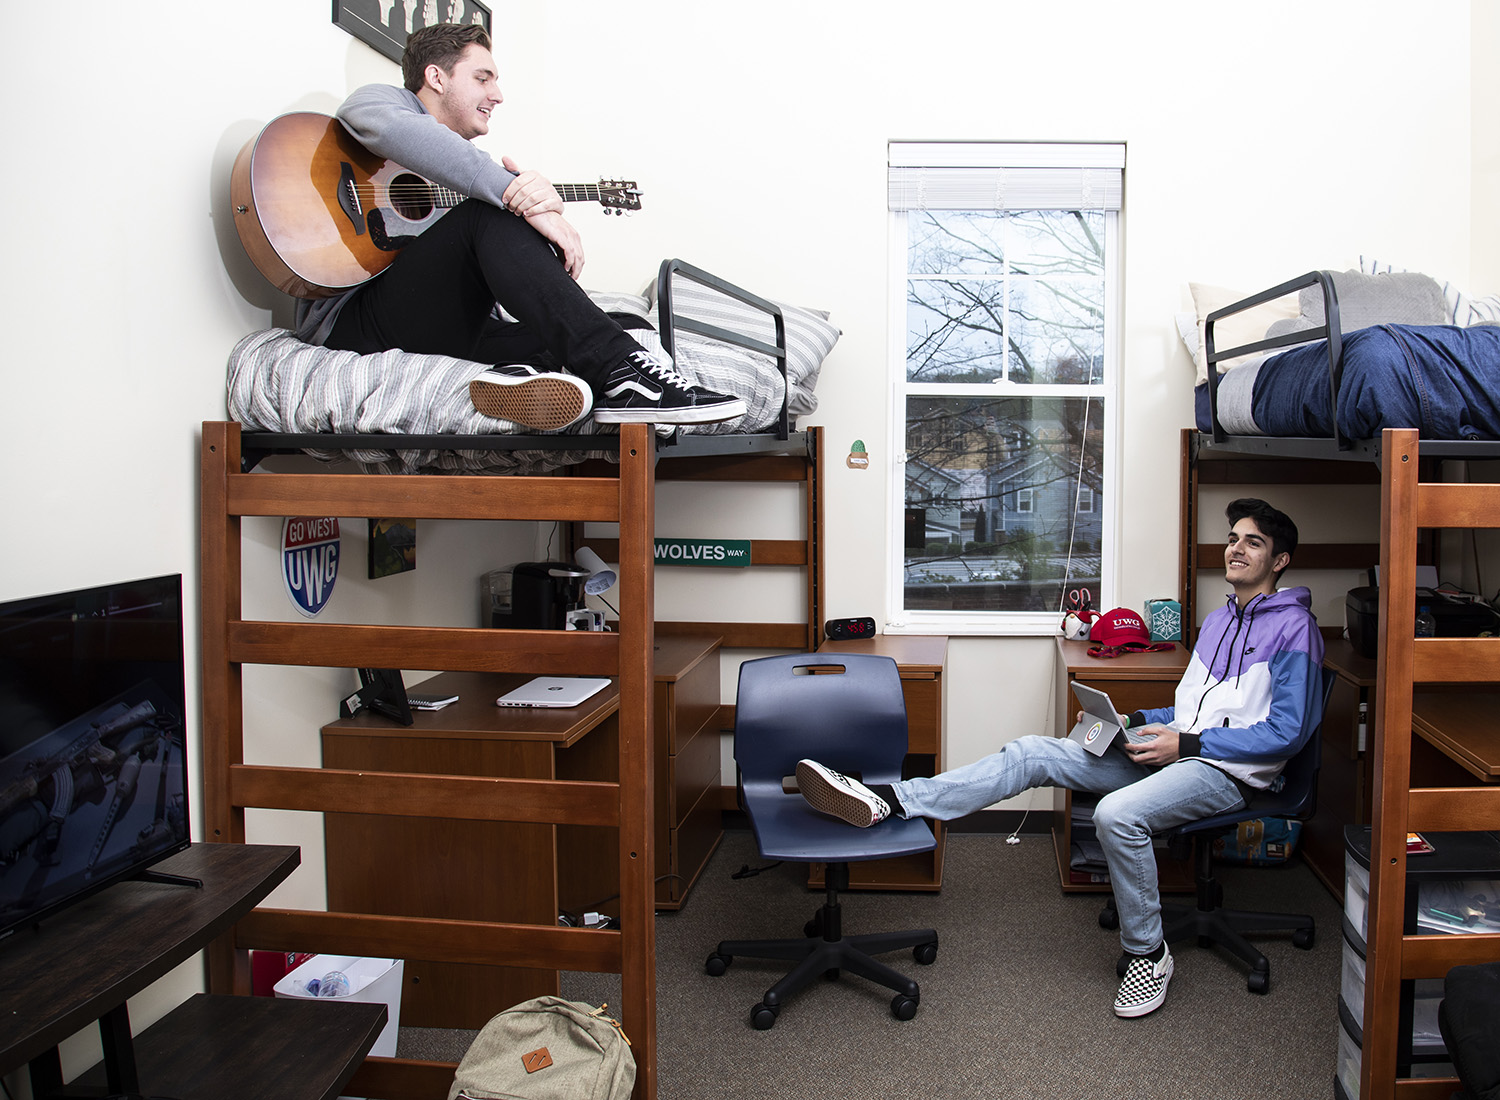 Students in dorm room. 